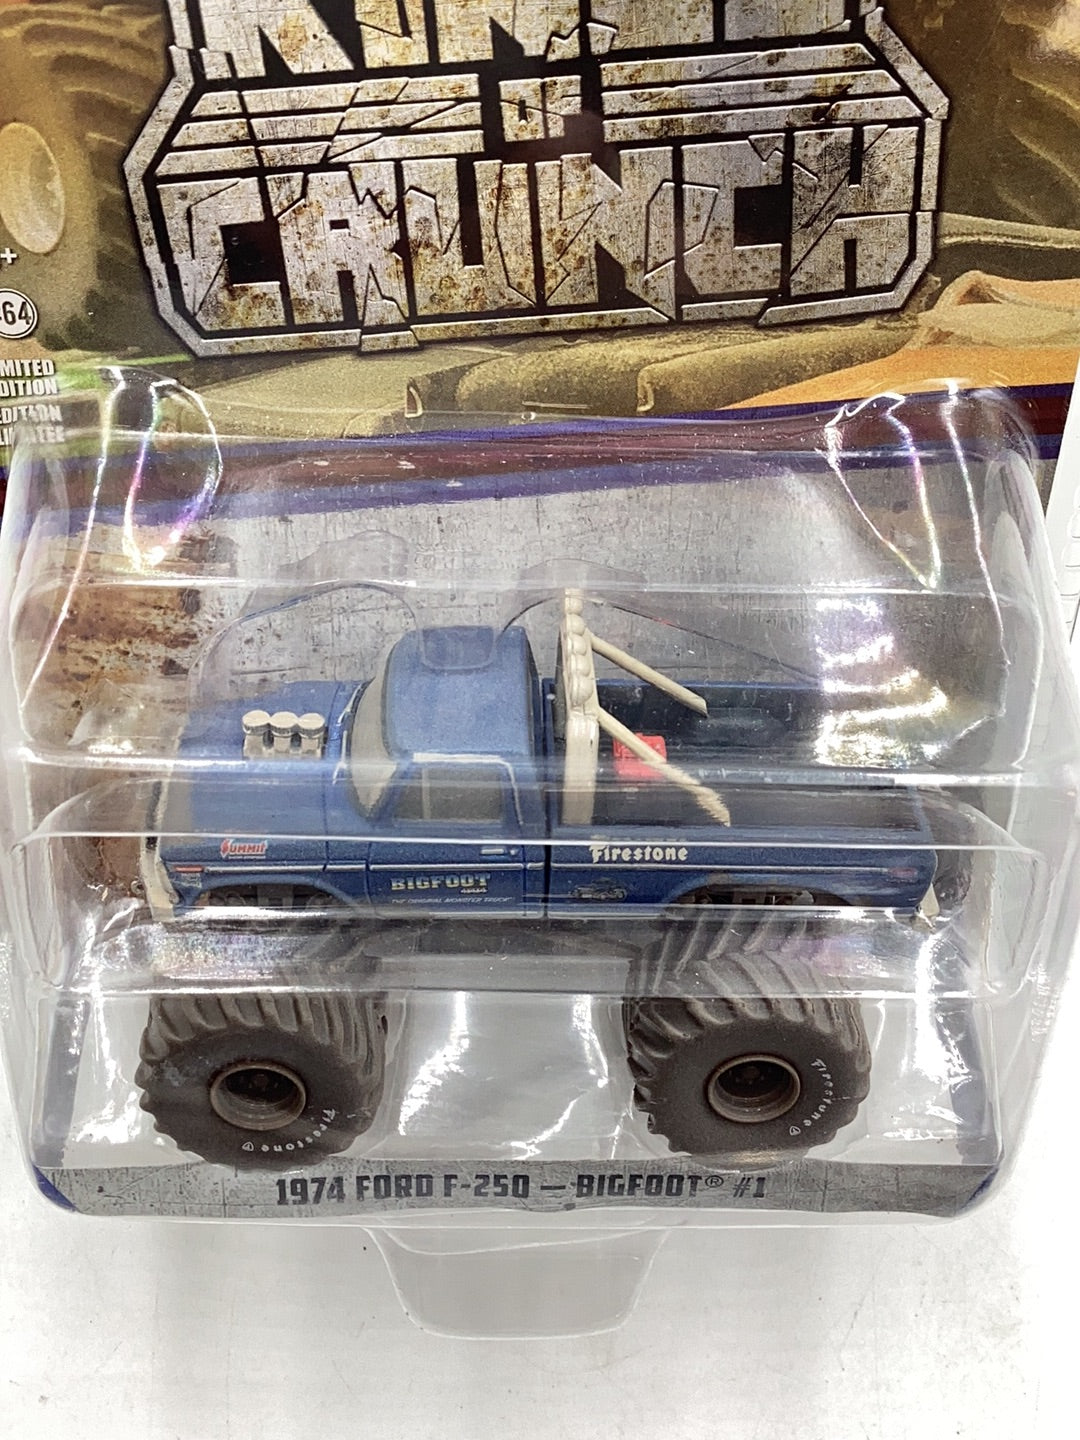 Greenlight Kings of crunch 1974 Ford F250 Bigfoot #1 Dirty version